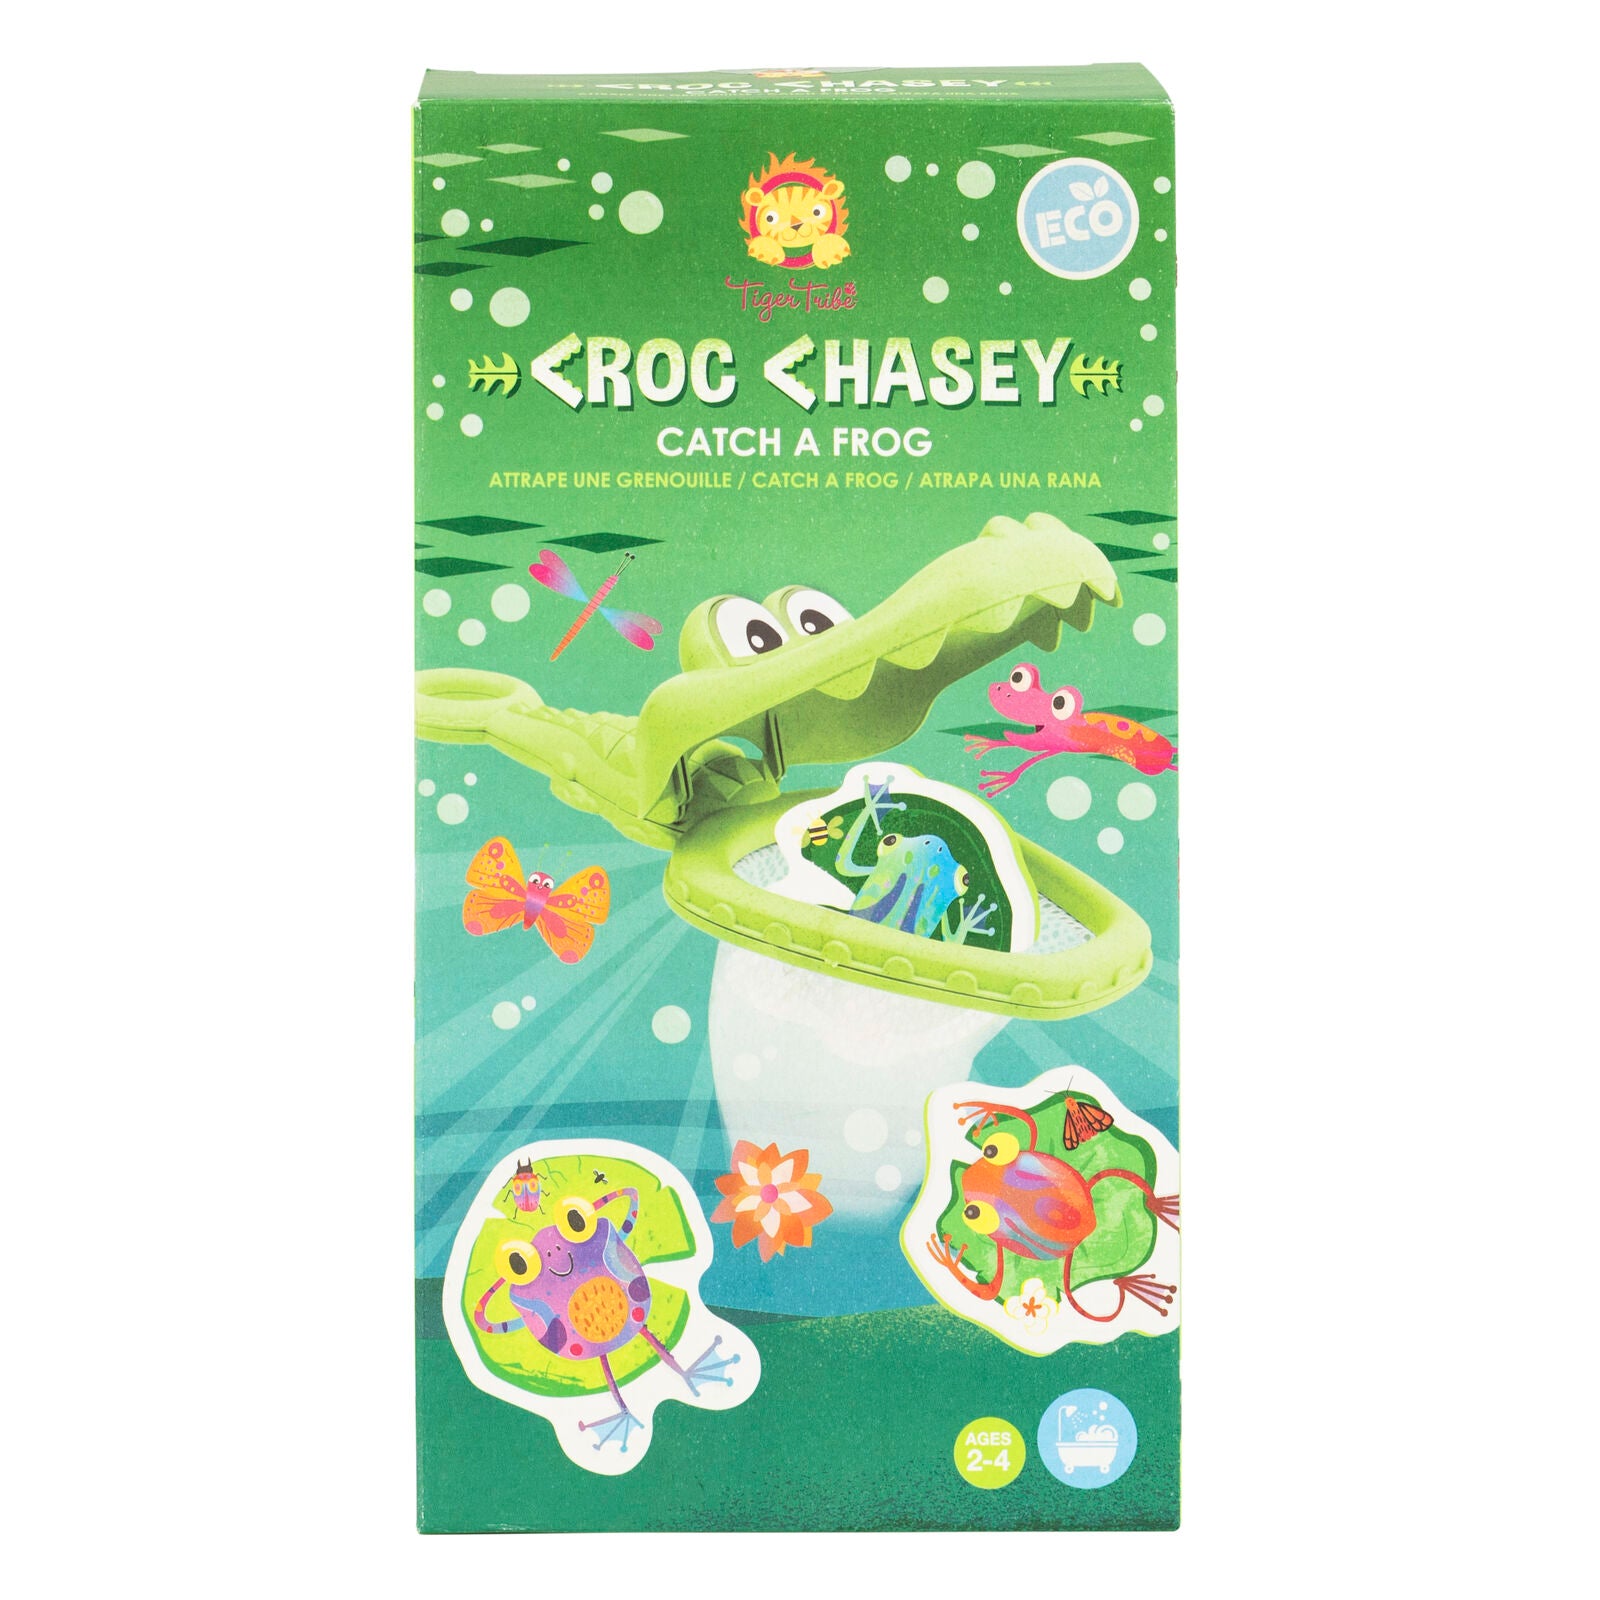 Tiger Tribe Croc Chasey – Catch A Frog